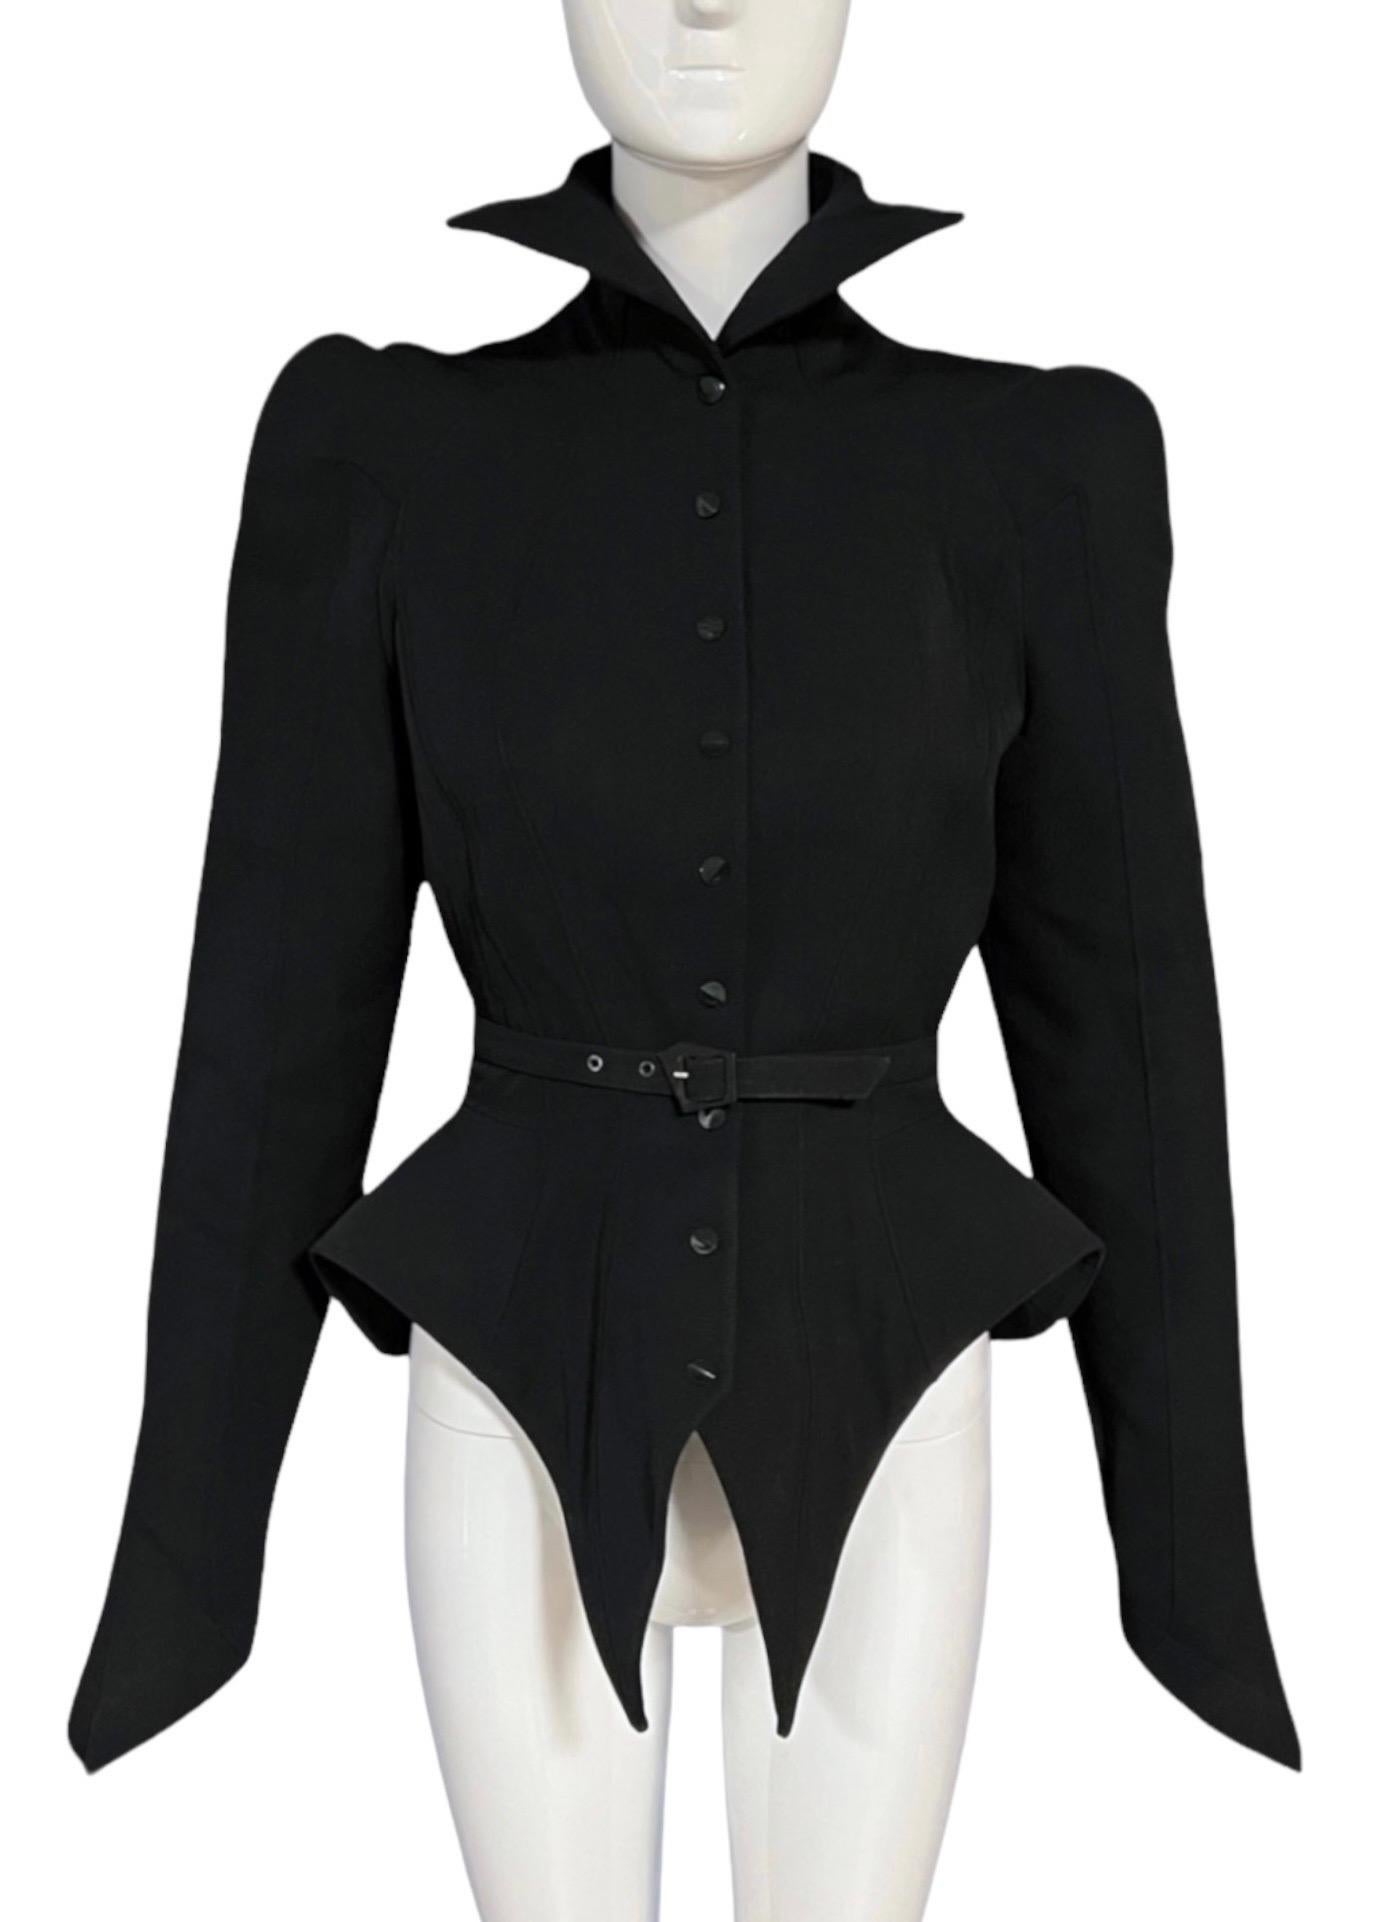 F/W 1988 Thierry Mugler Black Les Infernales Structural Runway Jacket For Sale 1